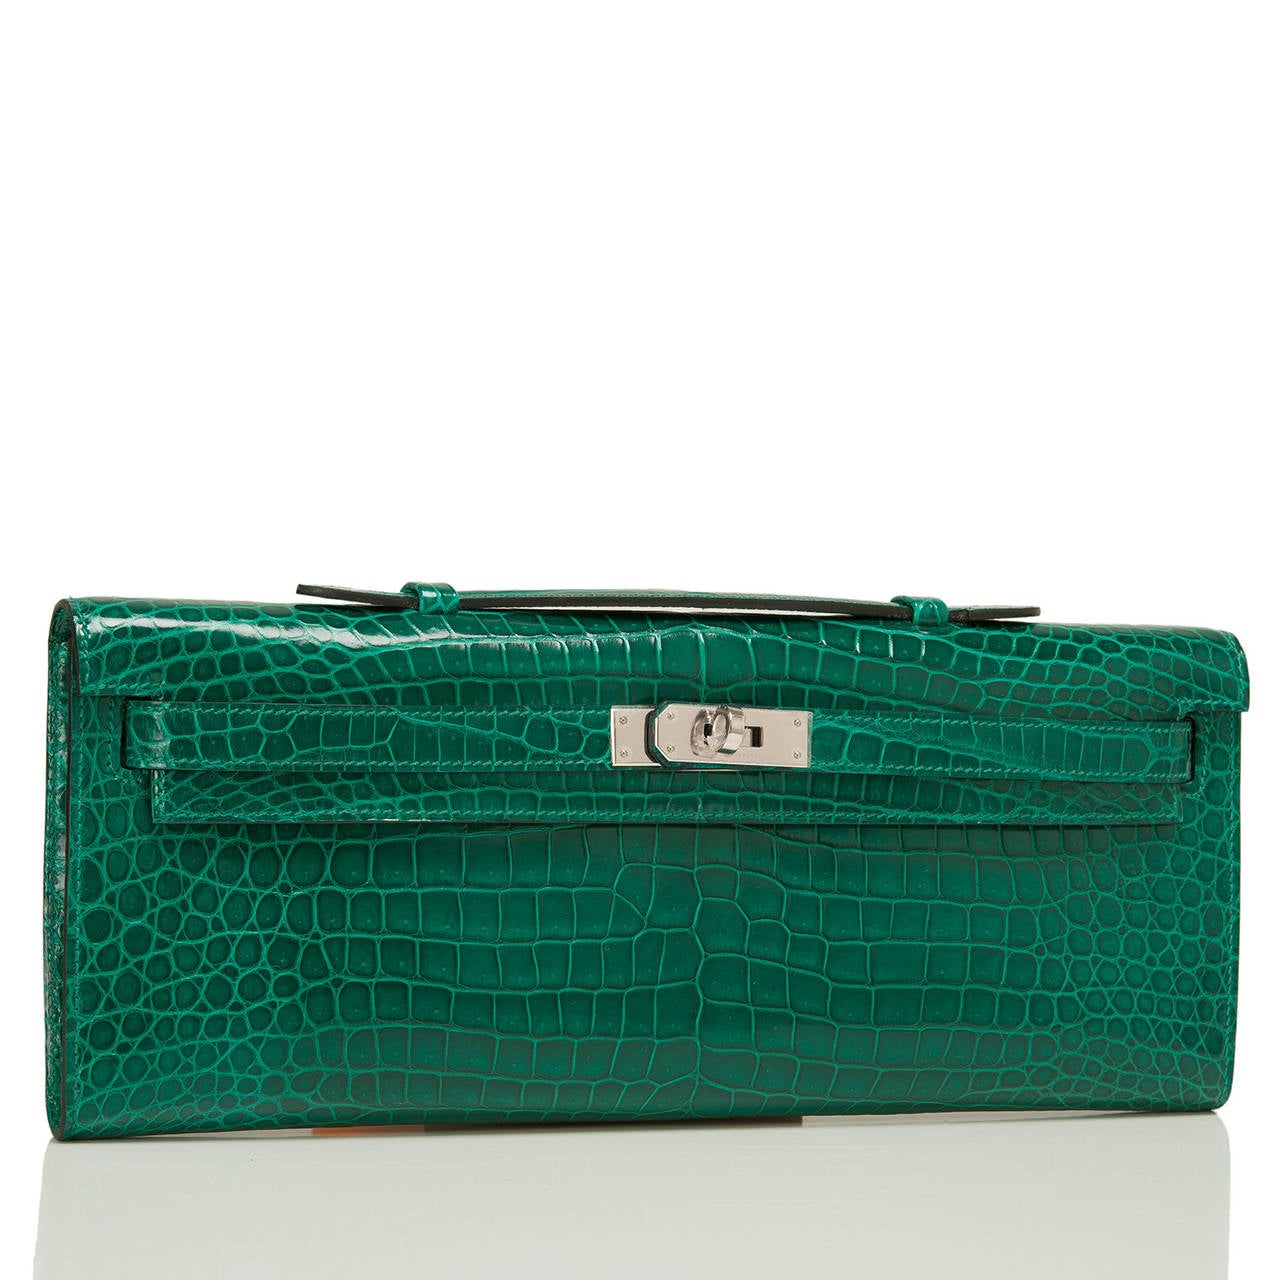 Hermes Emerald Porosus Crocodile Kelly Cut with palladium hardware.

This exotic Kelly Cut of Emerald Green Shiny Porosus crocodile is a gorgeous treasure, paired with complimenting palladium hardware; the bag has tonal stitching, front straps